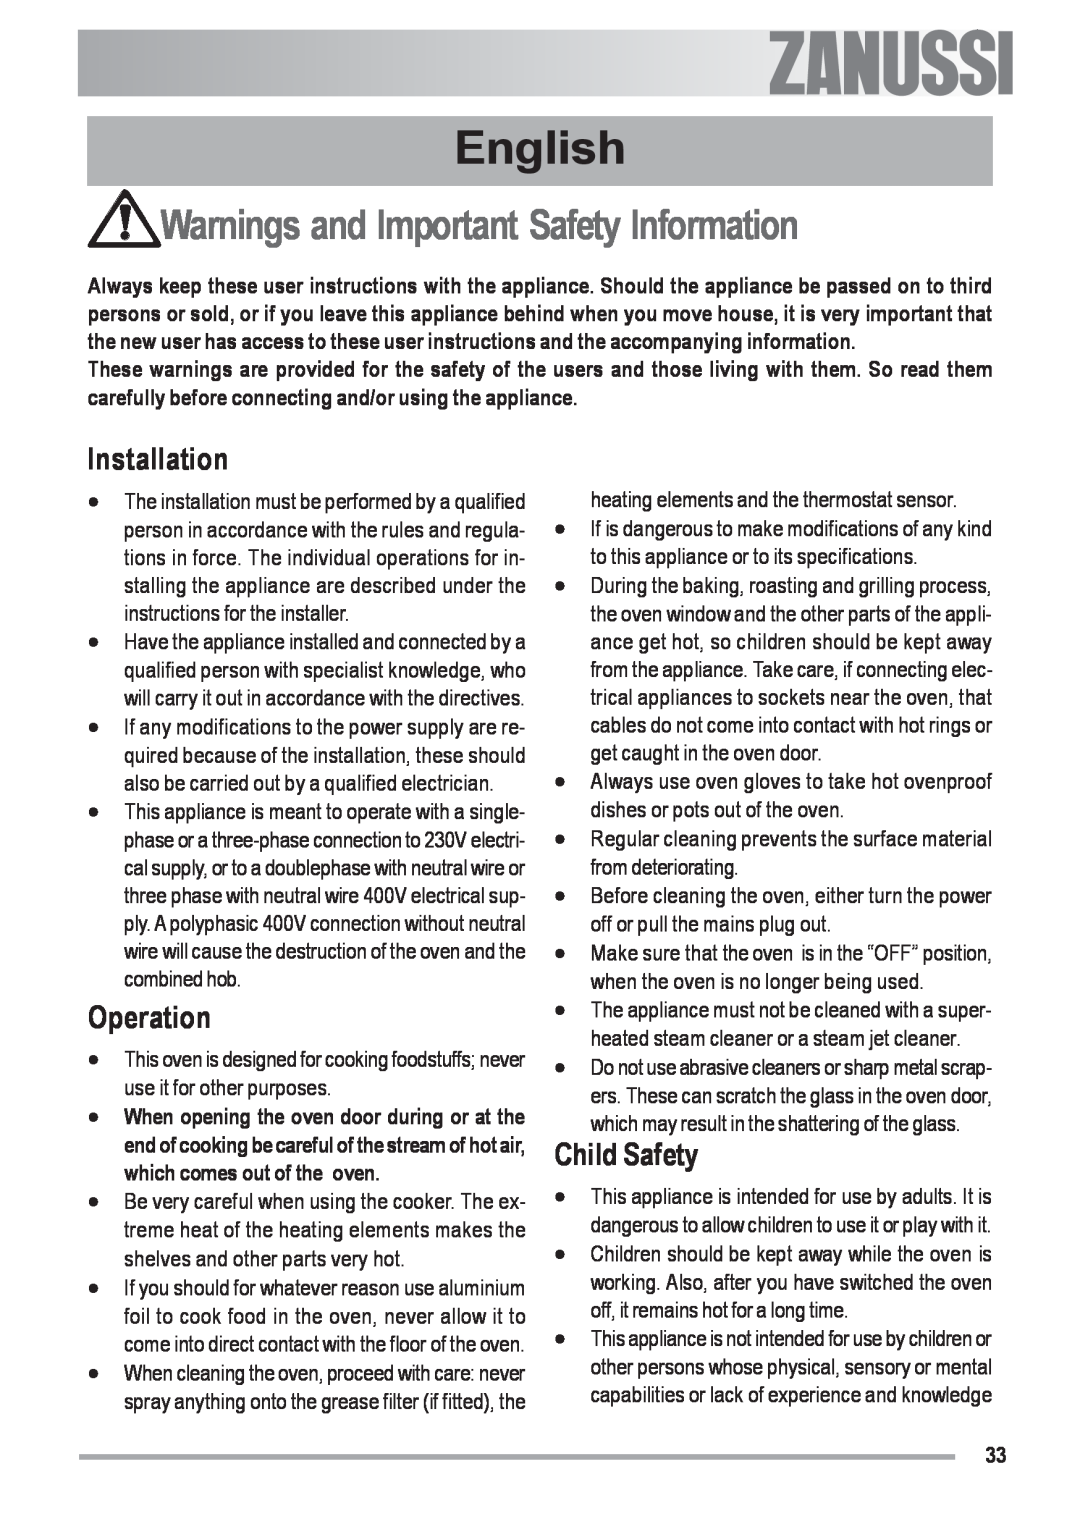 Zanussi ZOU 592 user manual English, Warnings and Important Safety Information, Installation, Operation, Child Safety 